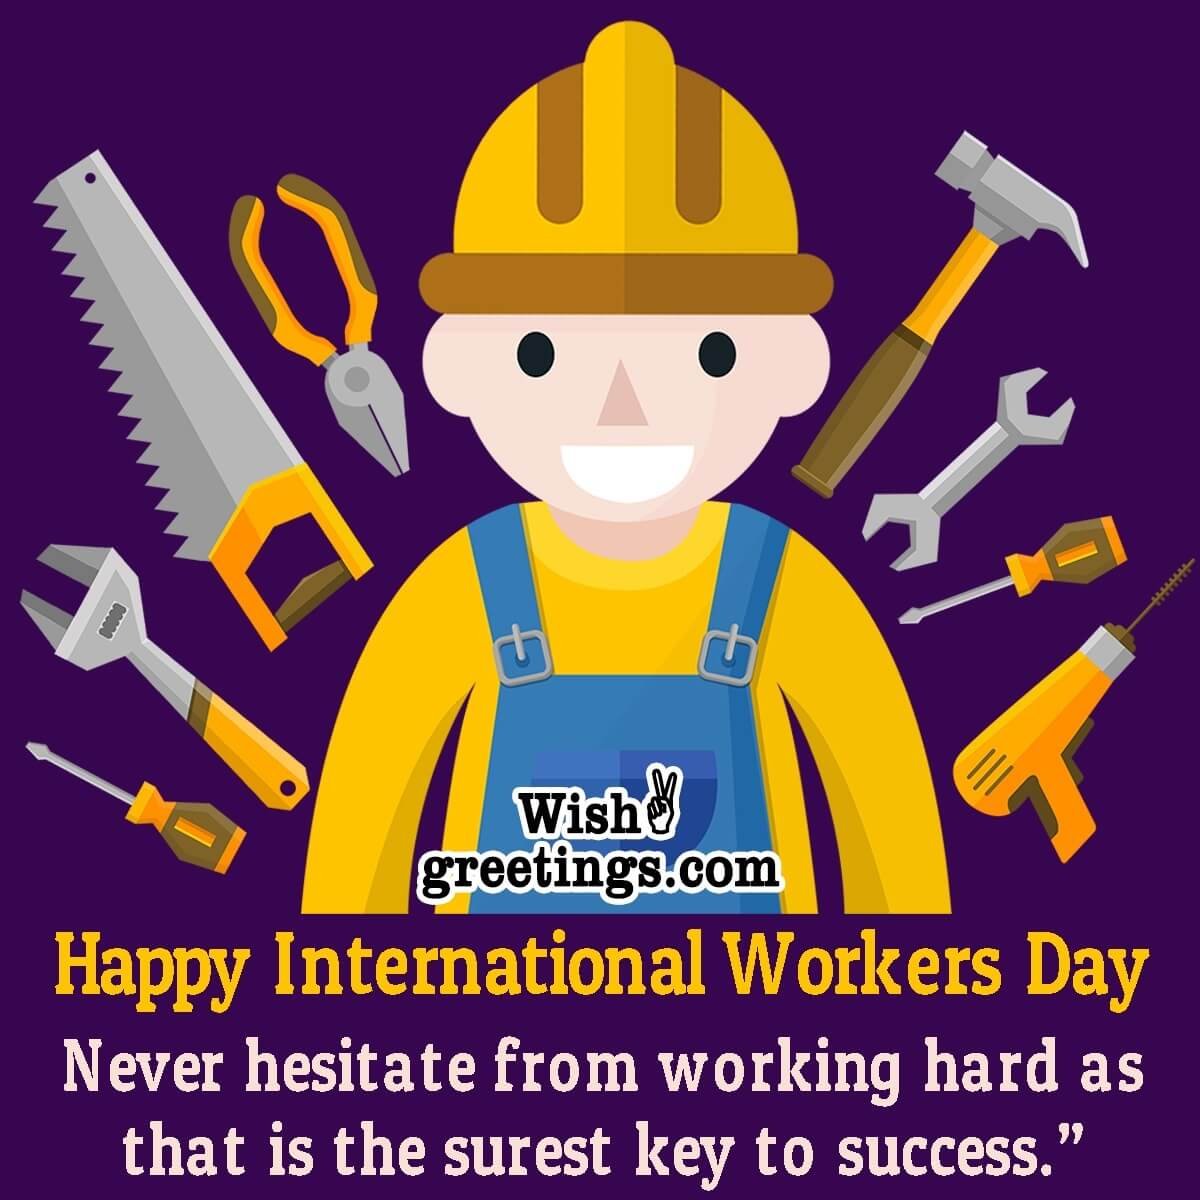 International Workers Day Wishes Messages Wish Greetings 4025